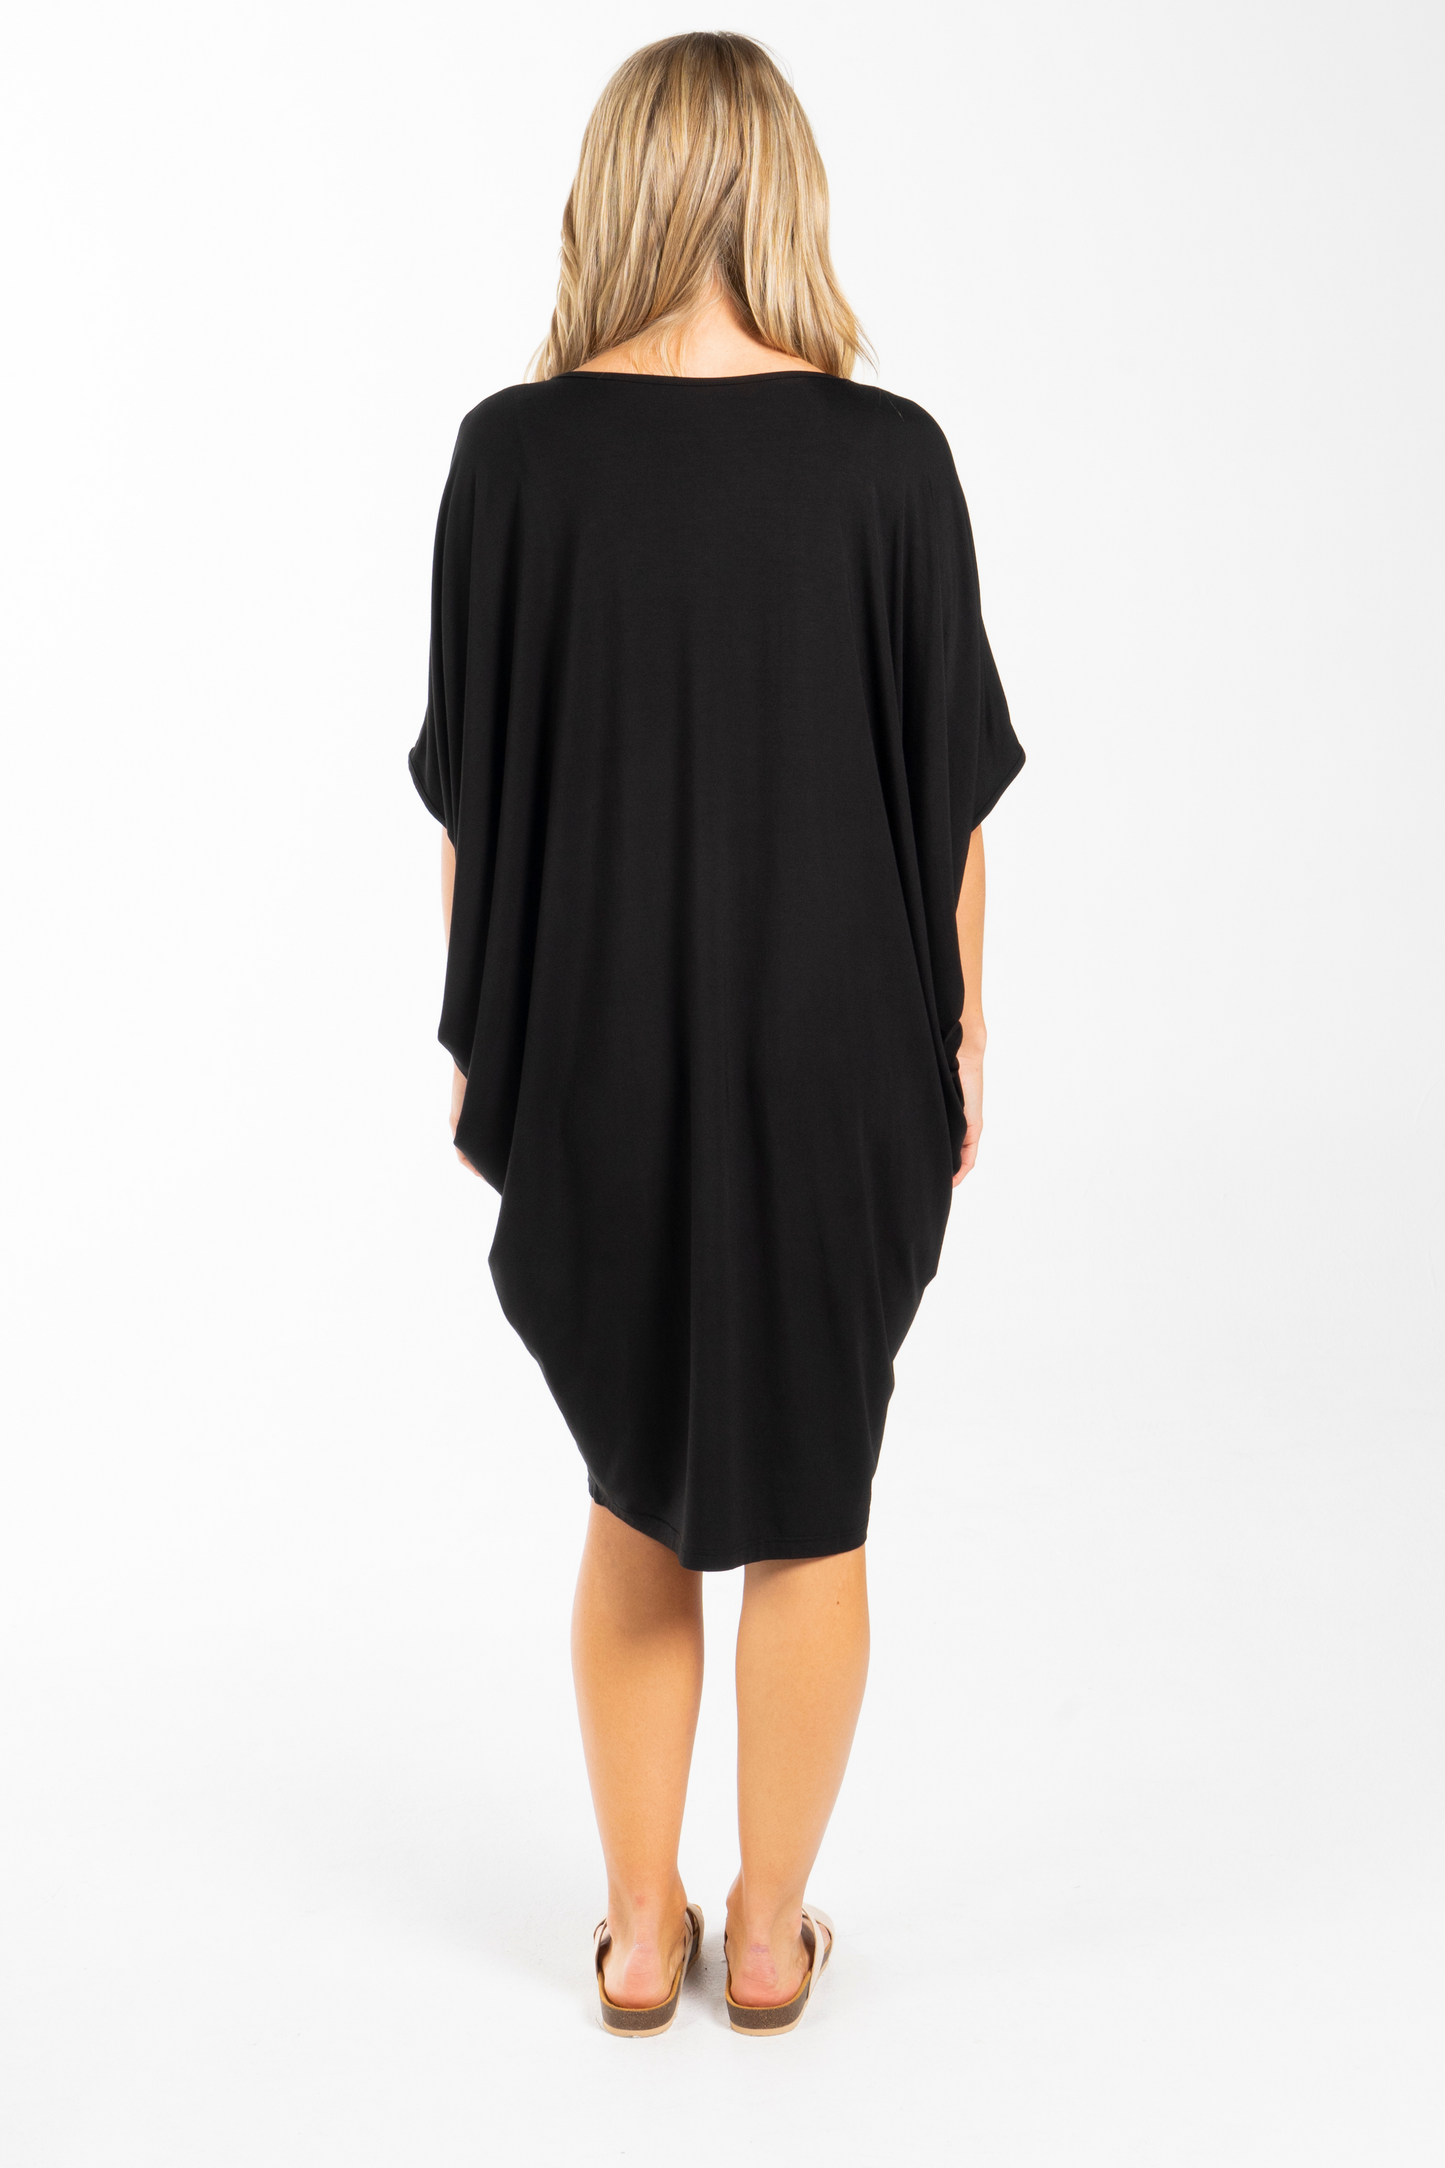 PQ Collection Miracle Dress in Black